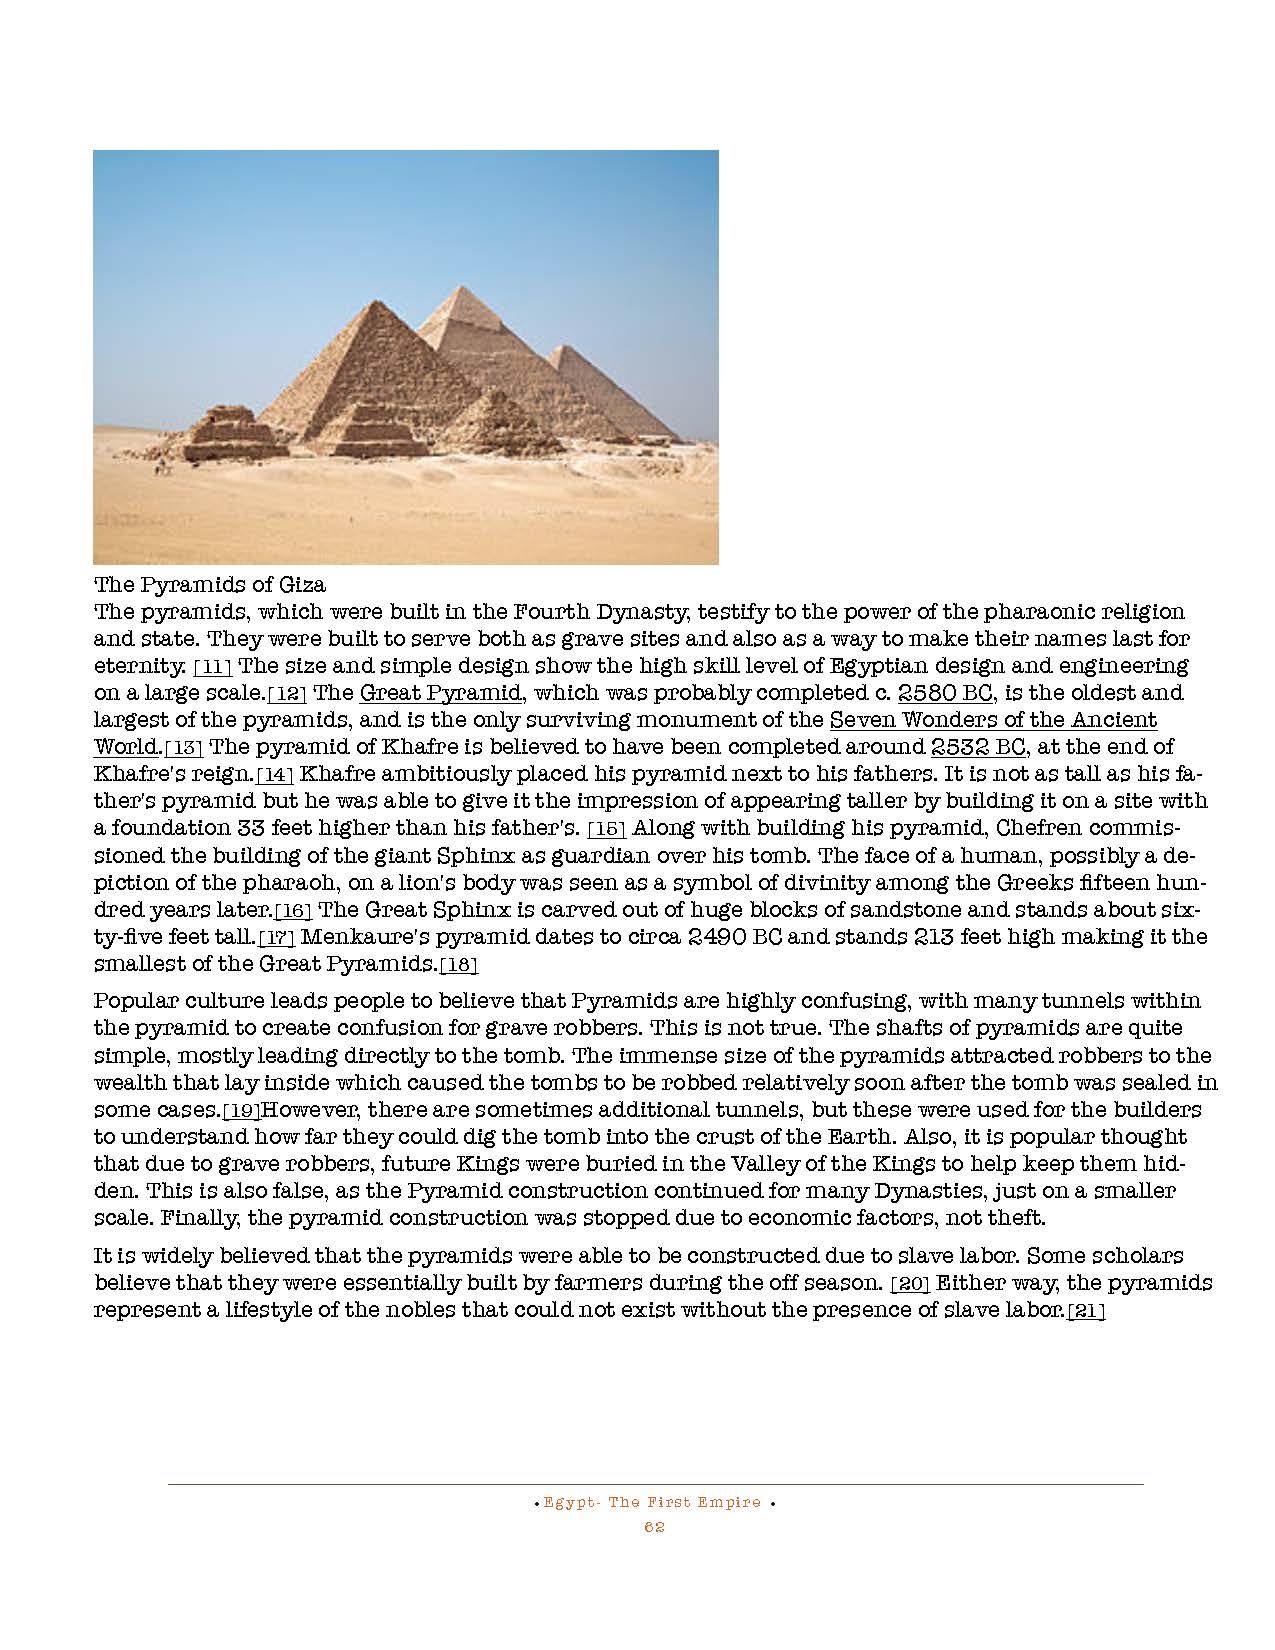 HOCE- Egypt  (First Empire) Notes_Page_062.jpg